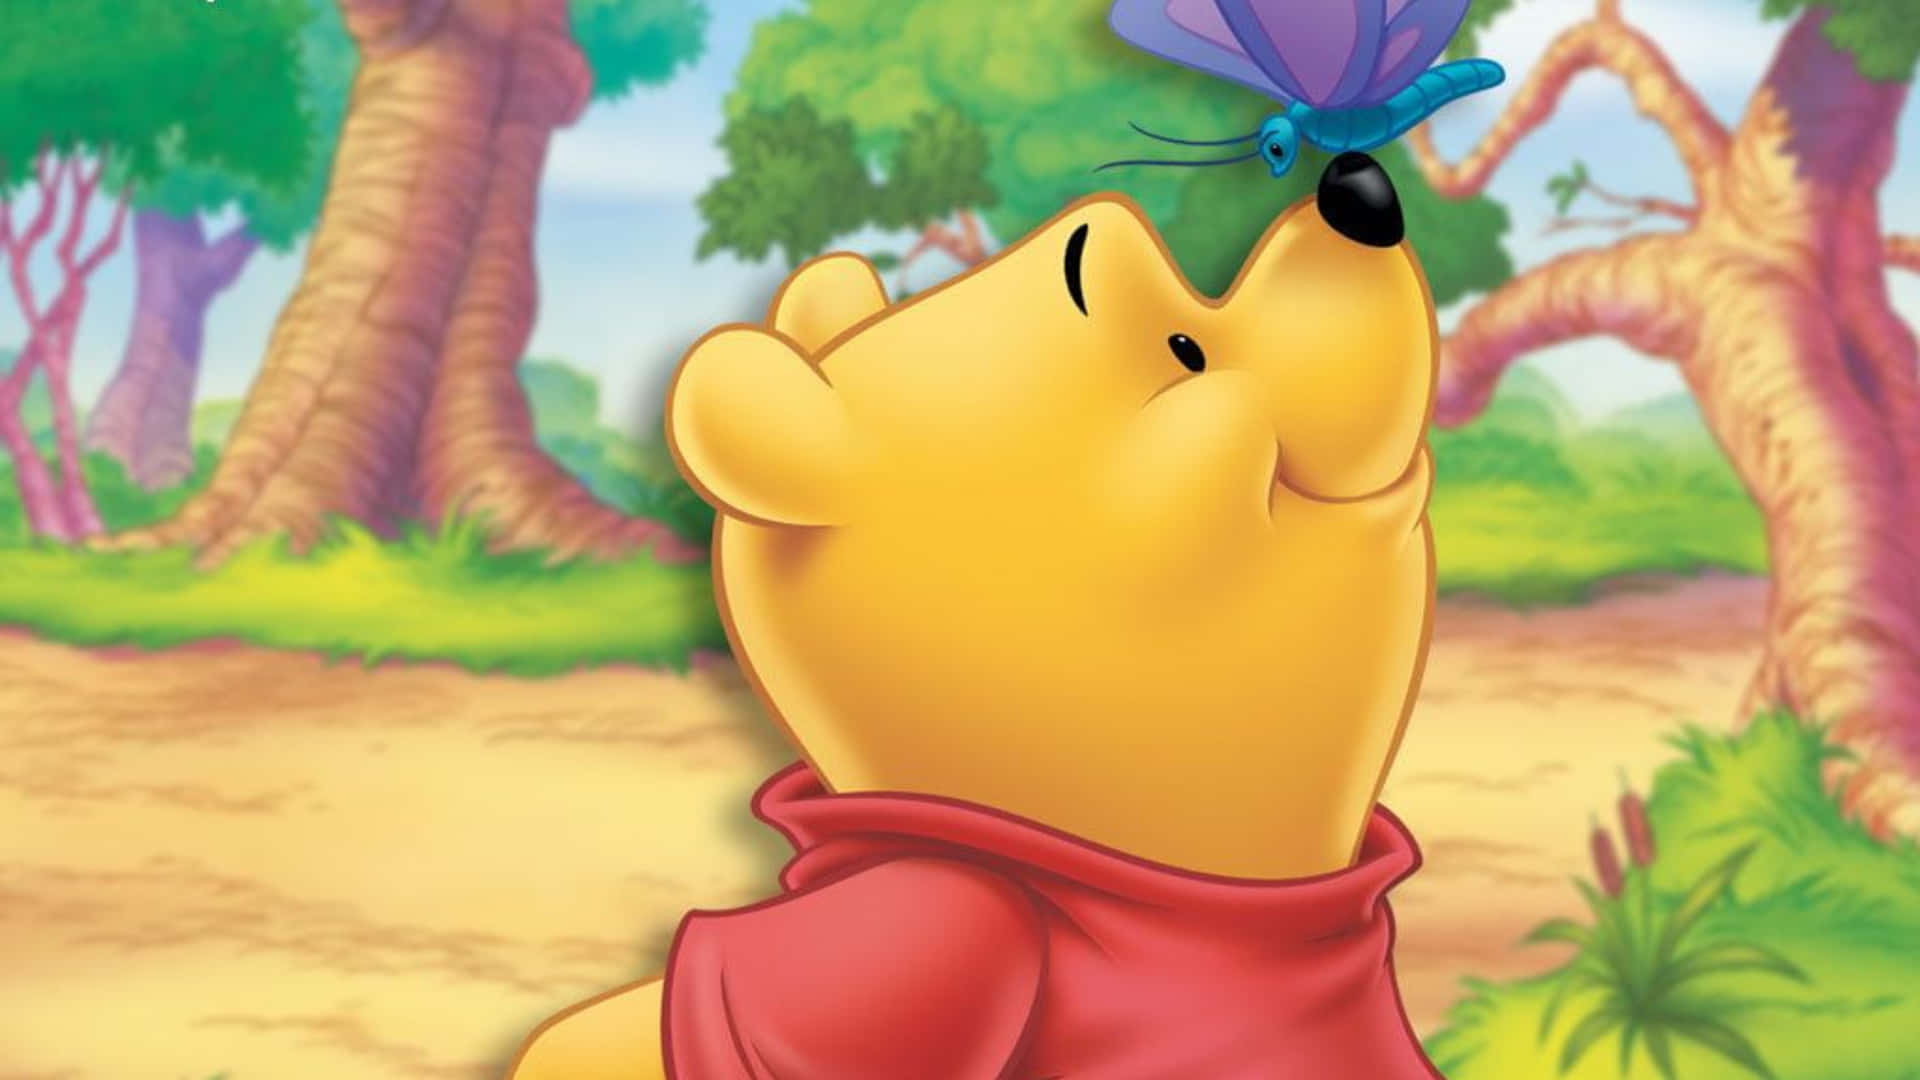 Celebrate the beloved Disney character Winnie The Pooh with this playful laptop wallpaper! Wallpaper